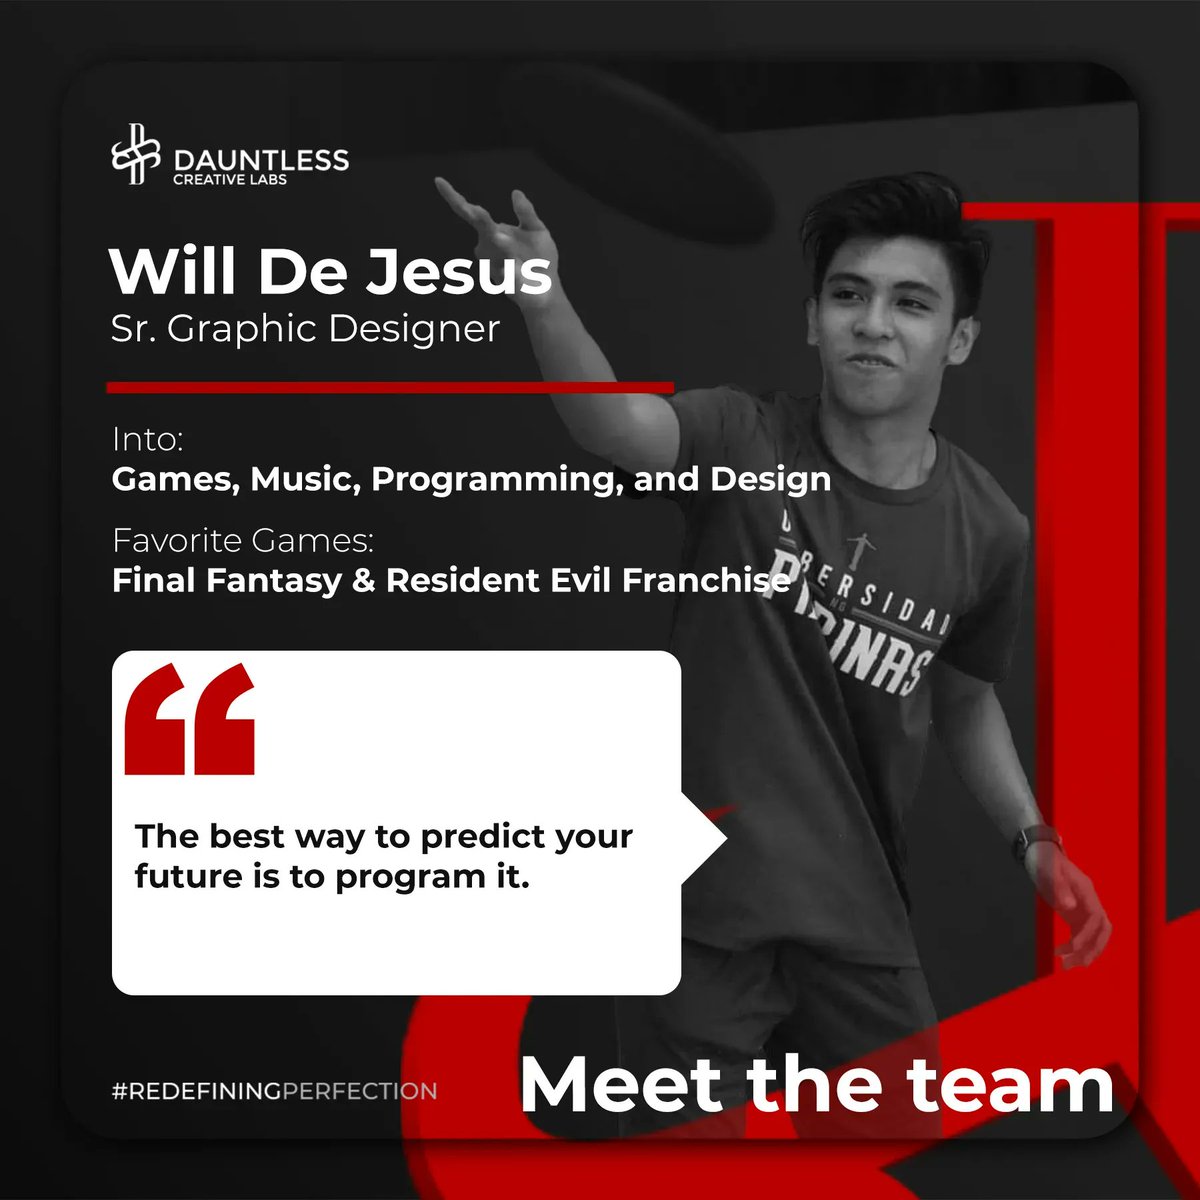 Meet the talented individuals behind Dauntless Creative Labs! This week, we're shining the spotlight on Will De Jesus, our Senior Graphic Designer. With his artistic flair and keen eye for detail, Will brings our creative visions to life. 

#BeDauntless #RedefiningPerfection